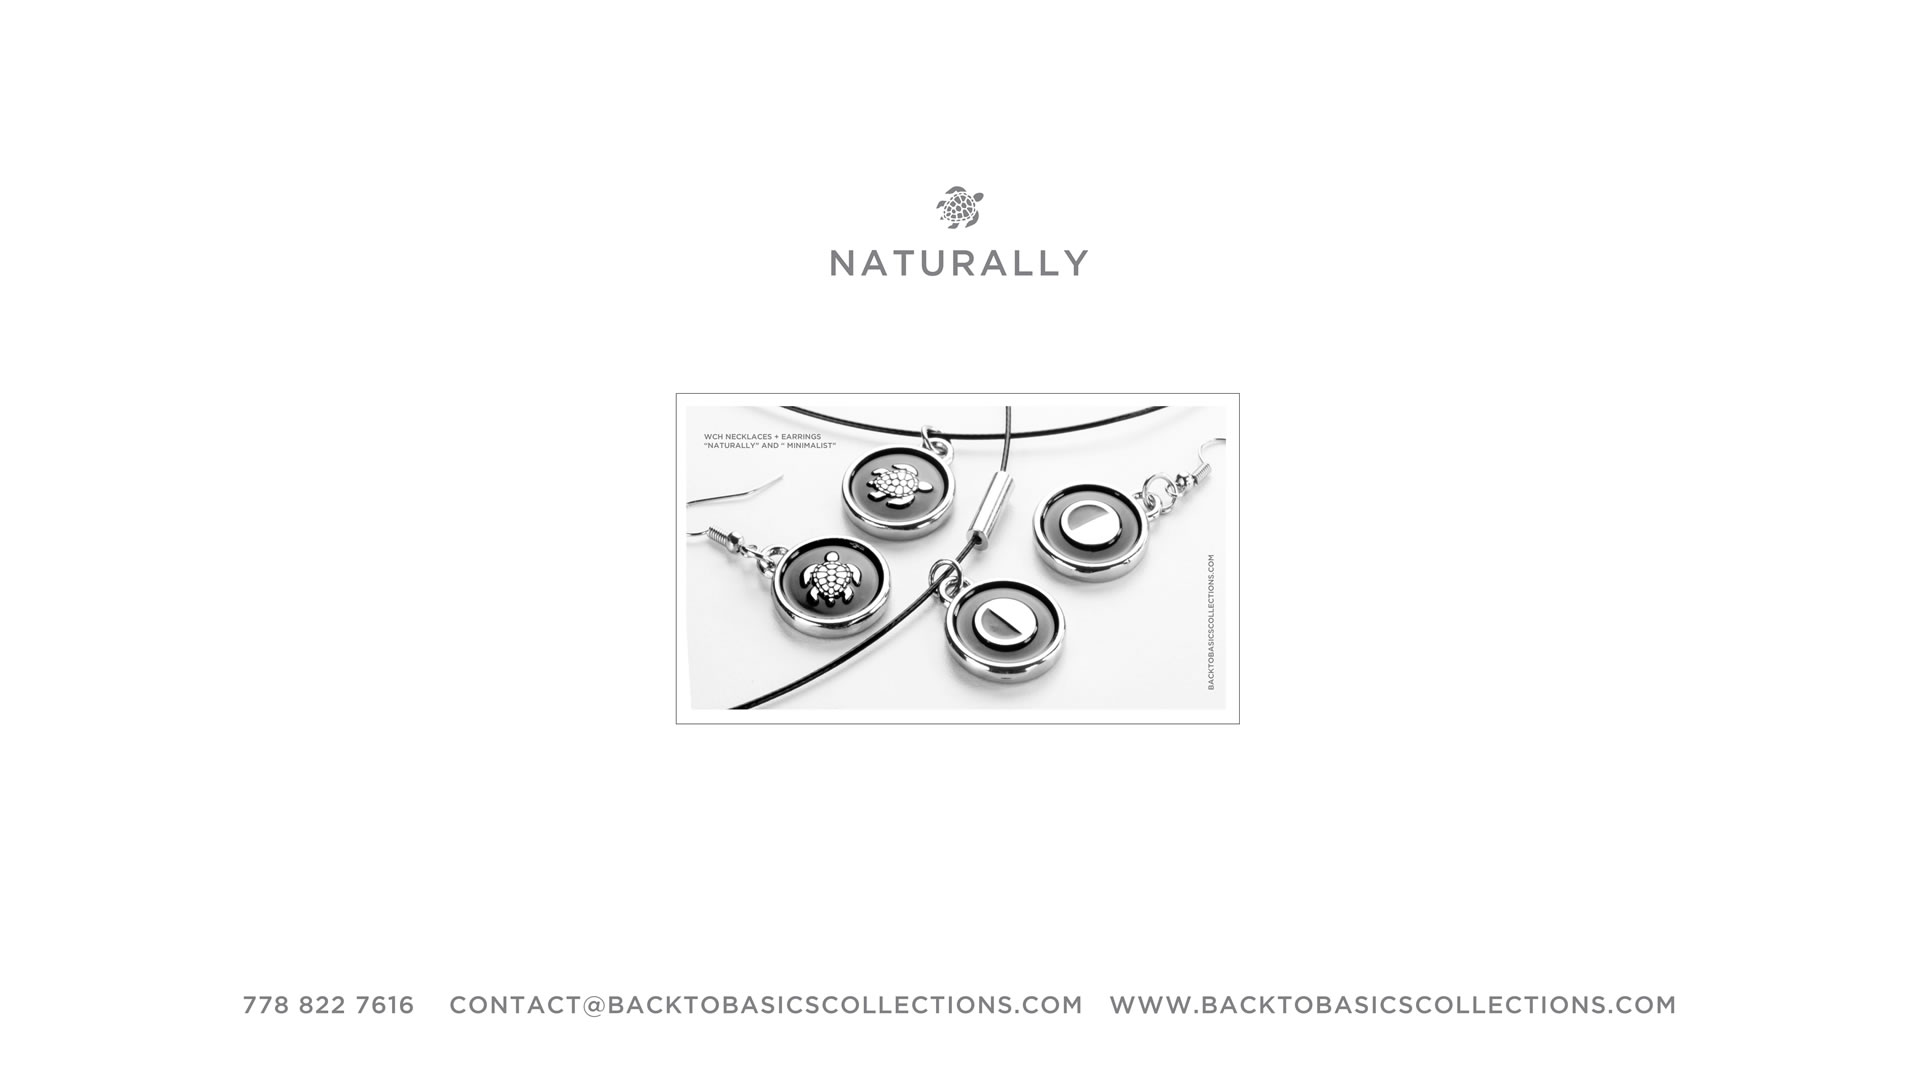 Back To Basics Collections